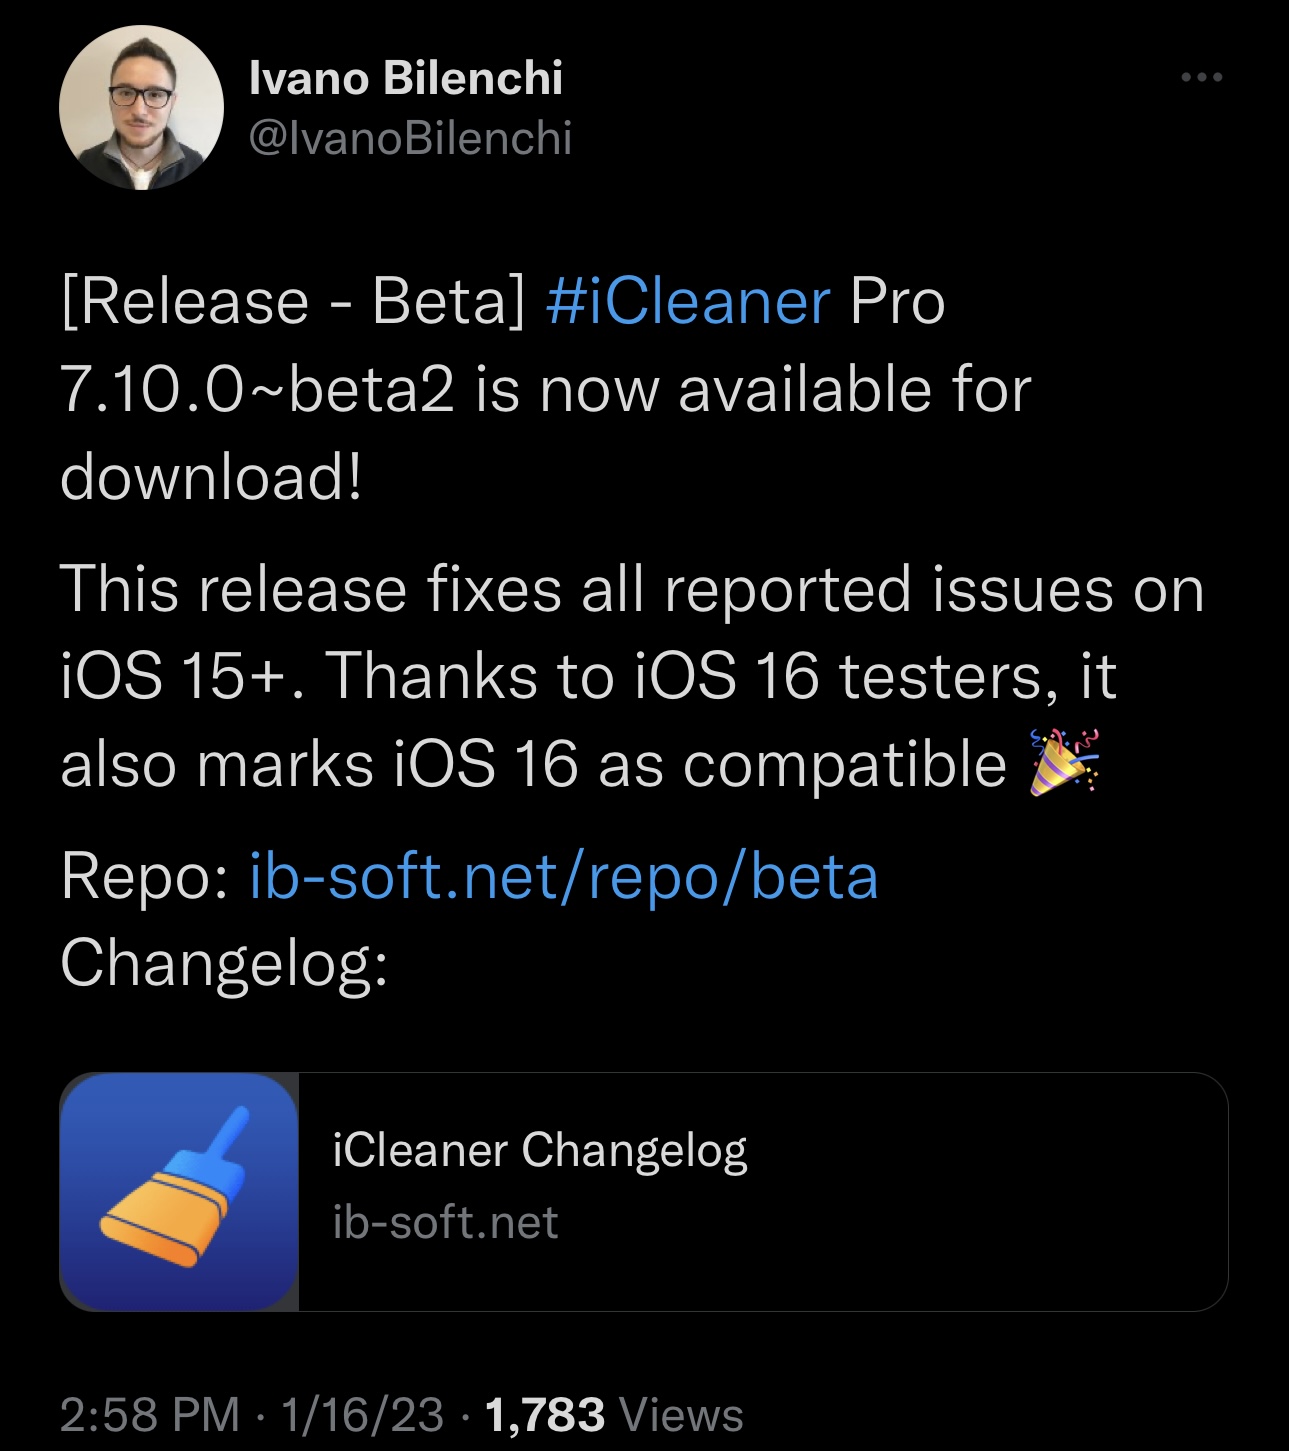 Ivano Bilenchi announces iOS 16 support for iCleaner.